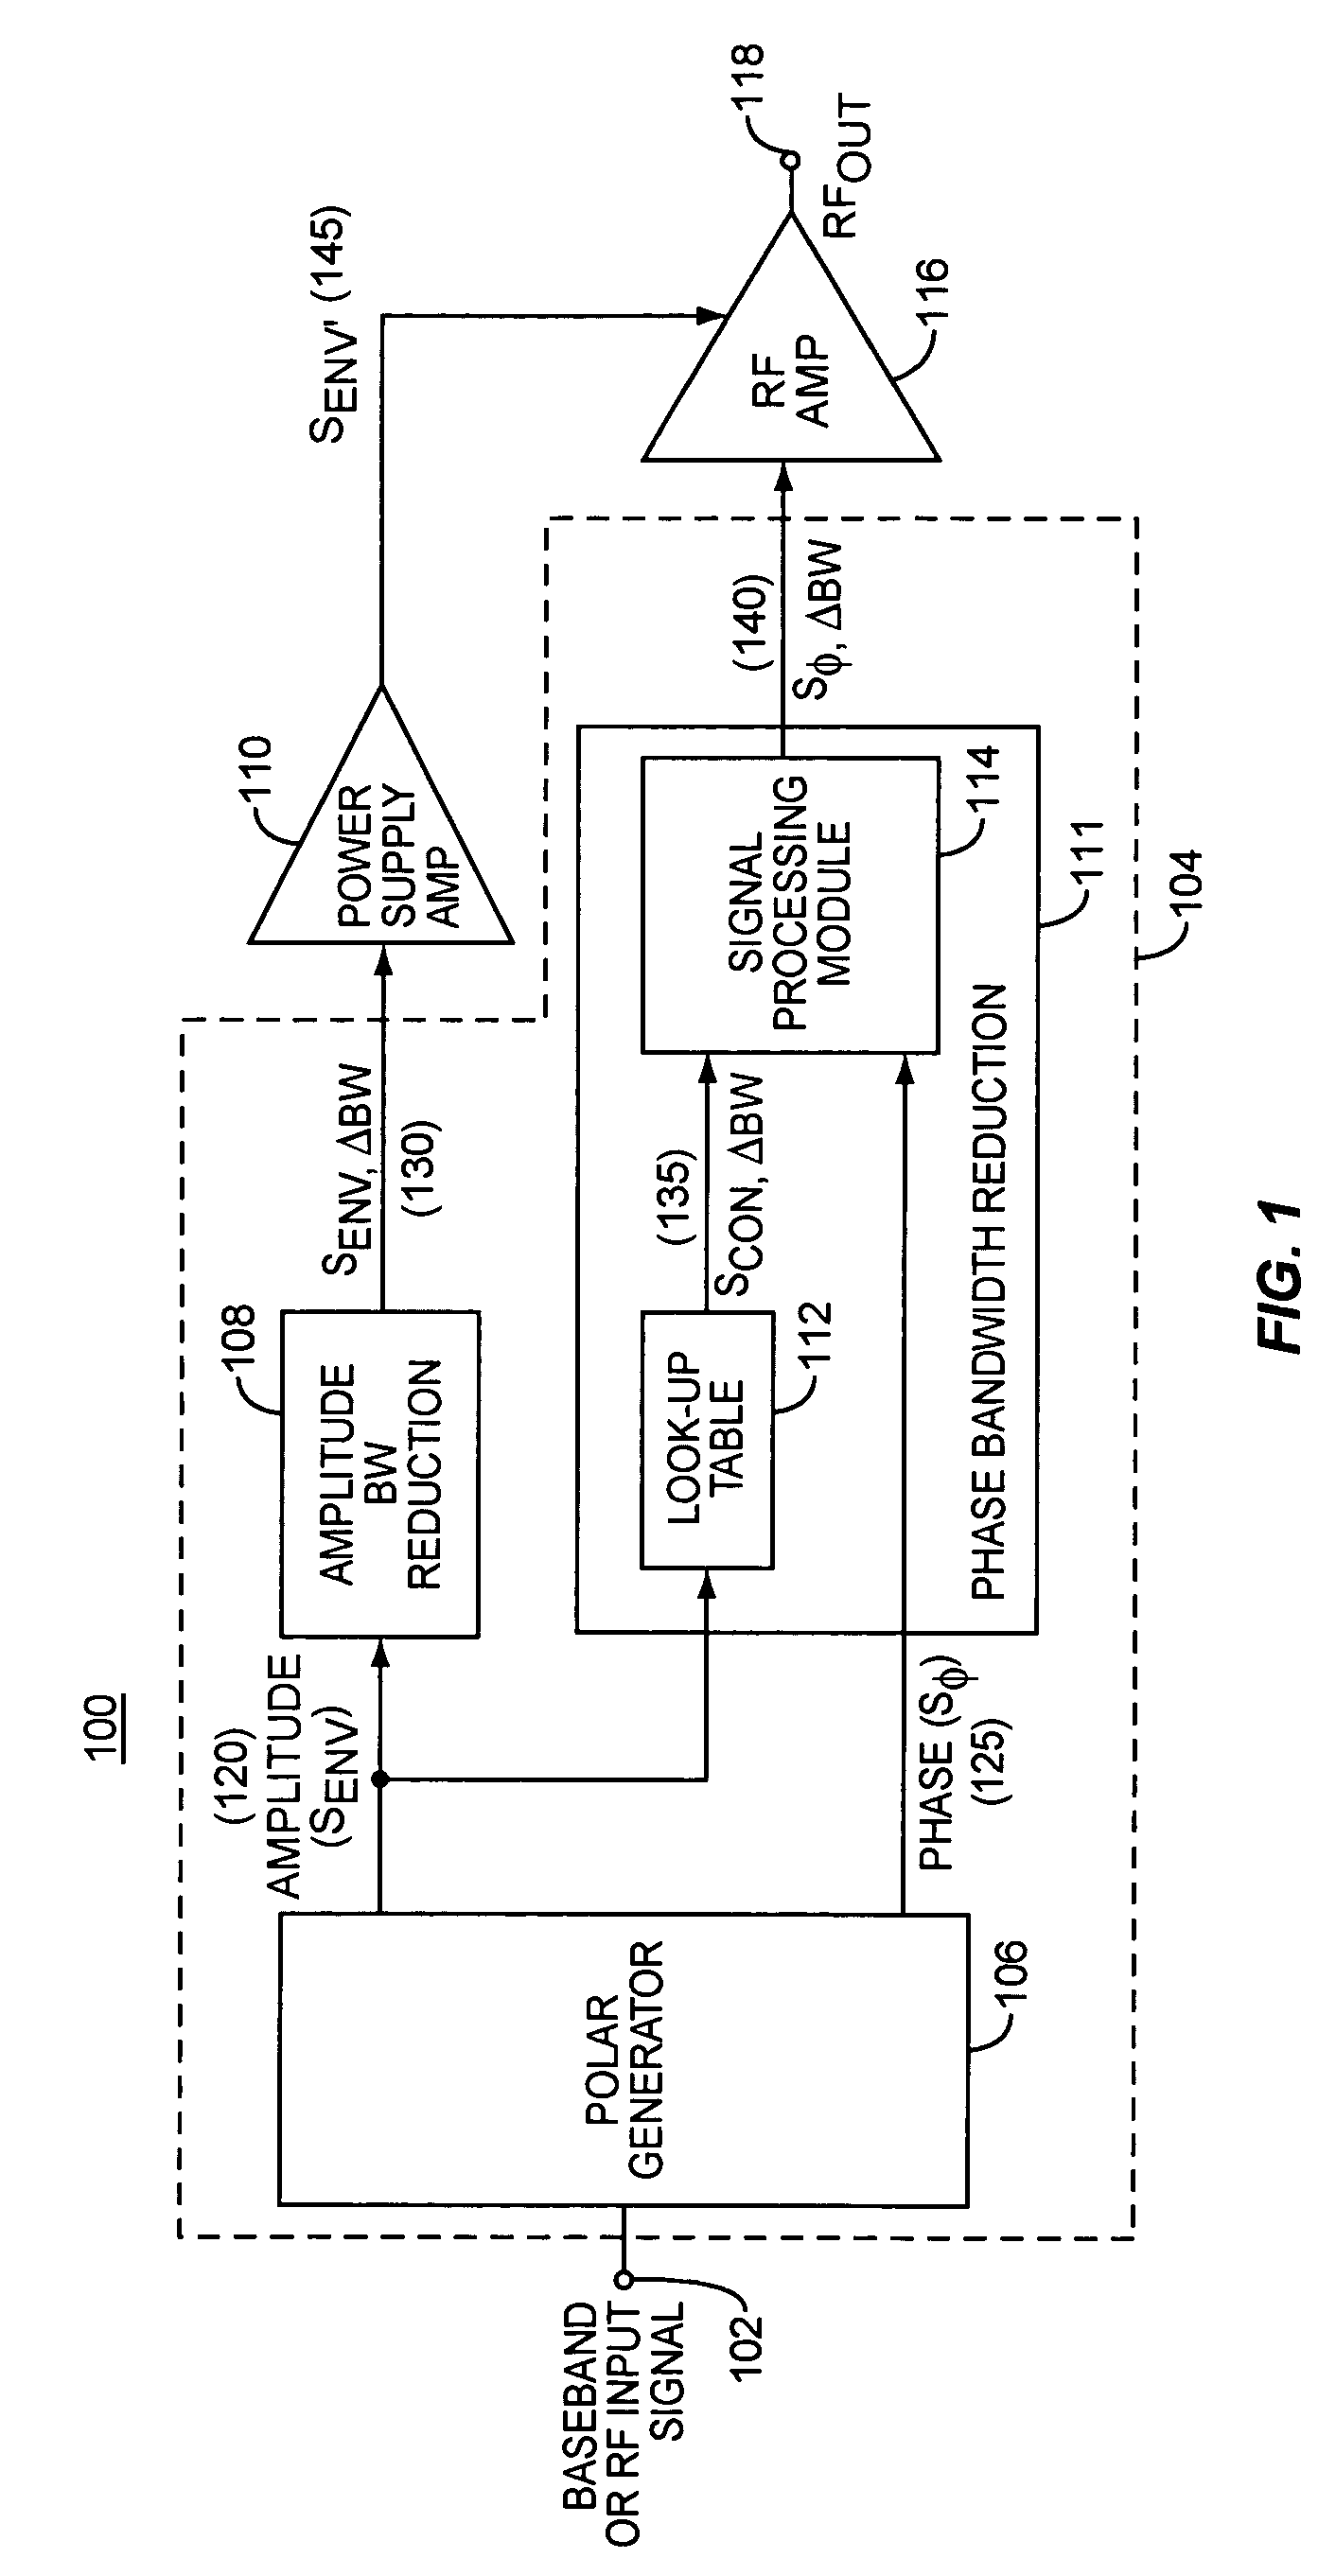 Systems and methods for amplification of a communication signal